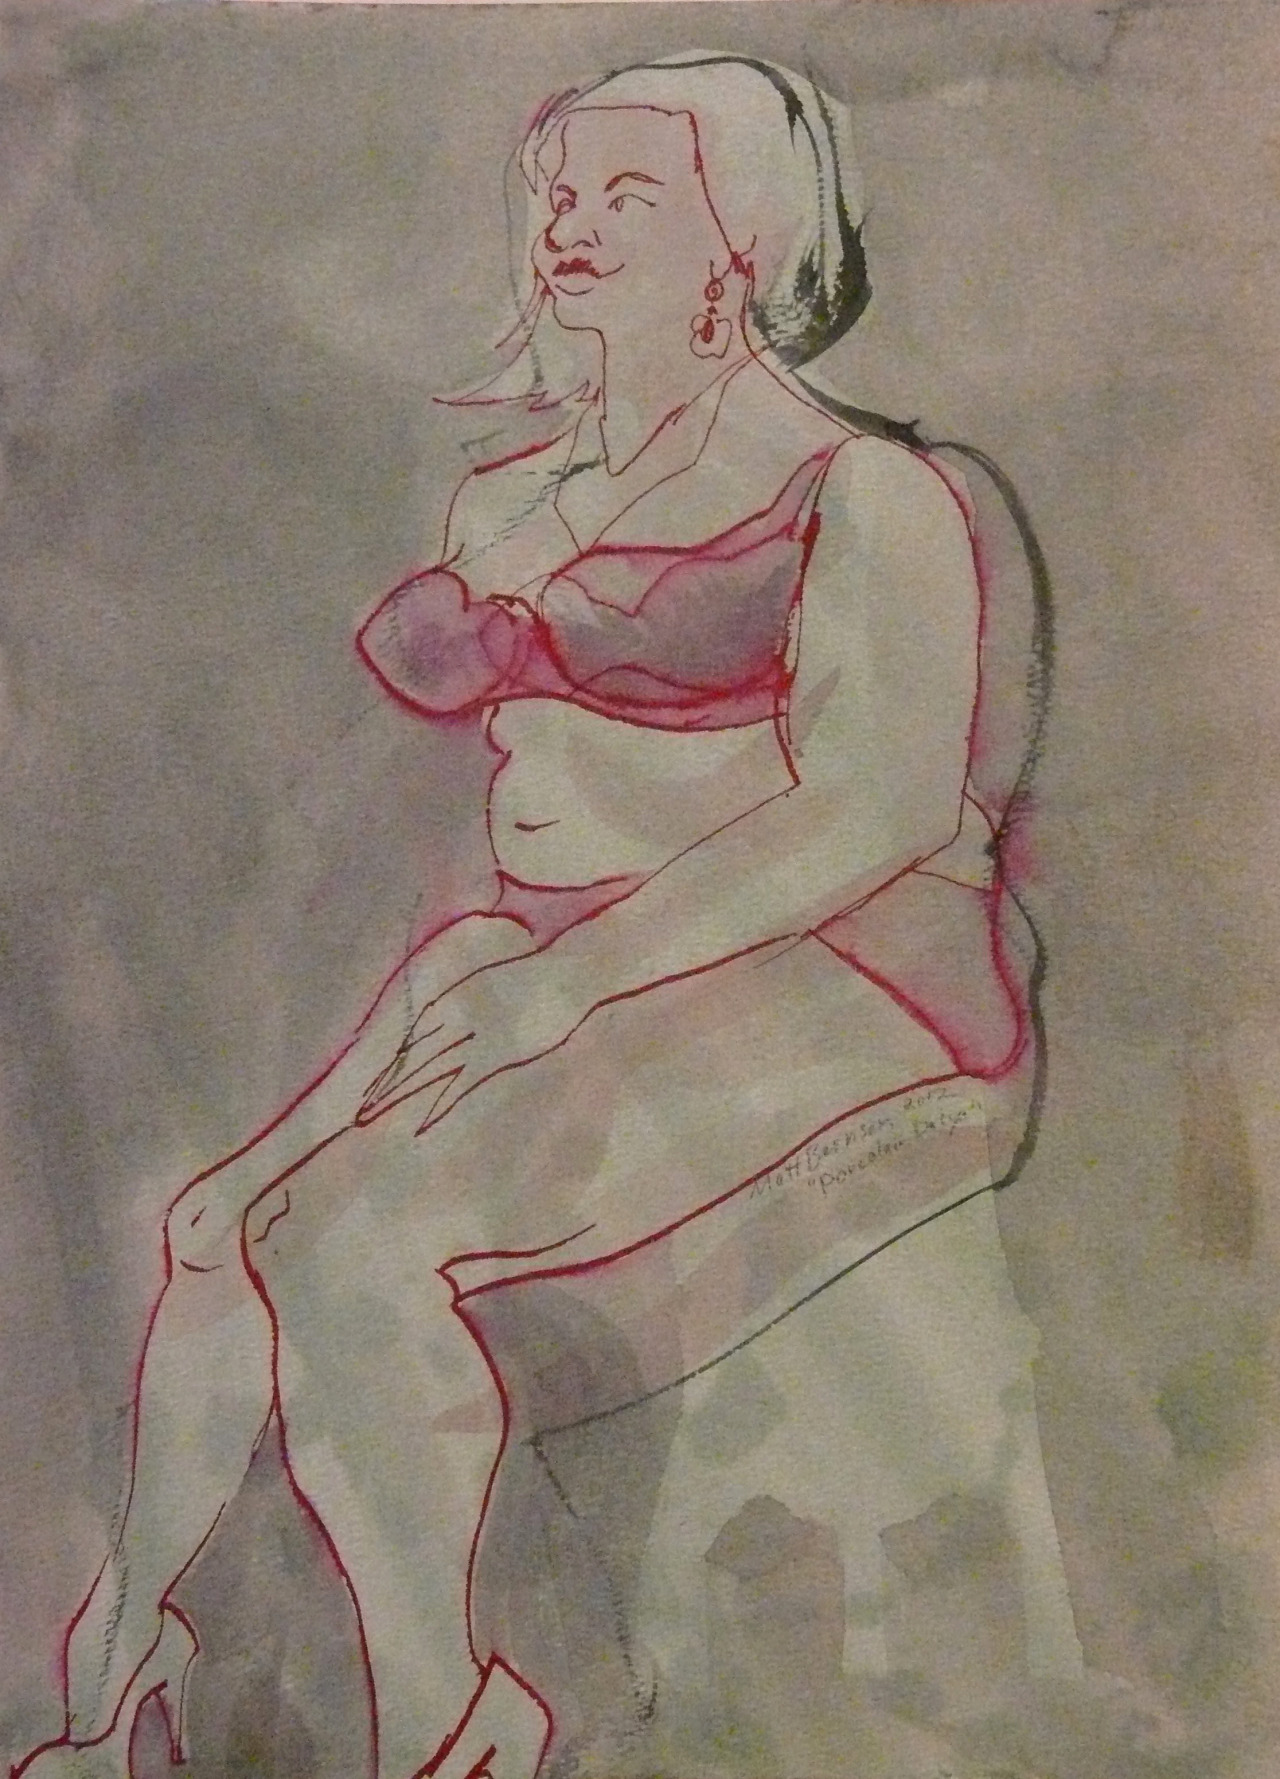 Drawings done at the Boston Dr Sketchy&rsquo;s a while ago.   Model: Porcelain